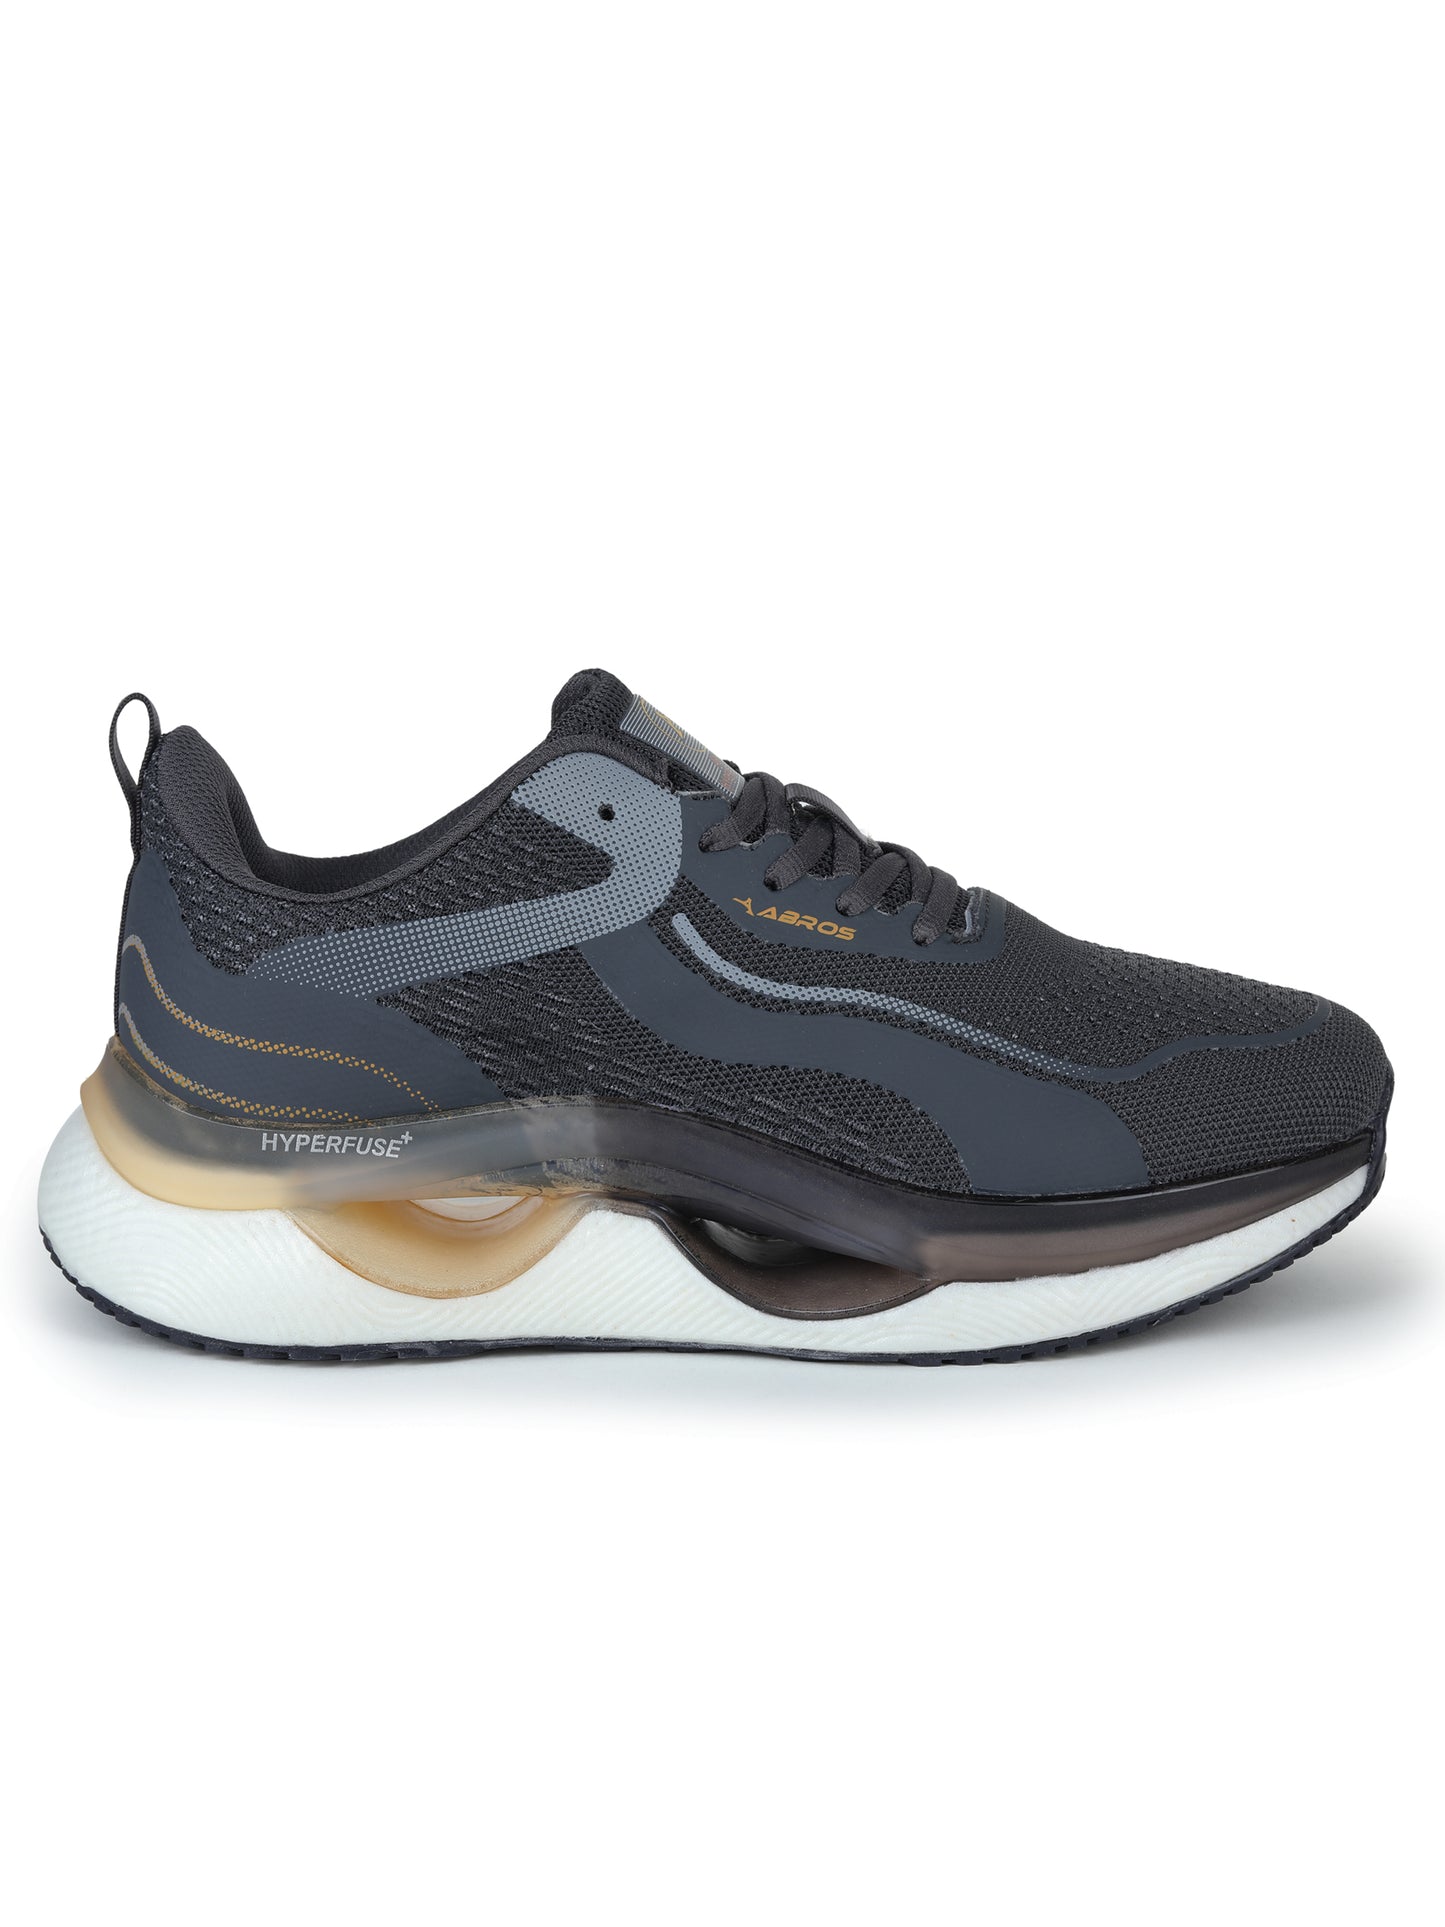 ABROS  TYLOR RUNNING SPORTS SHOES FOR MEN